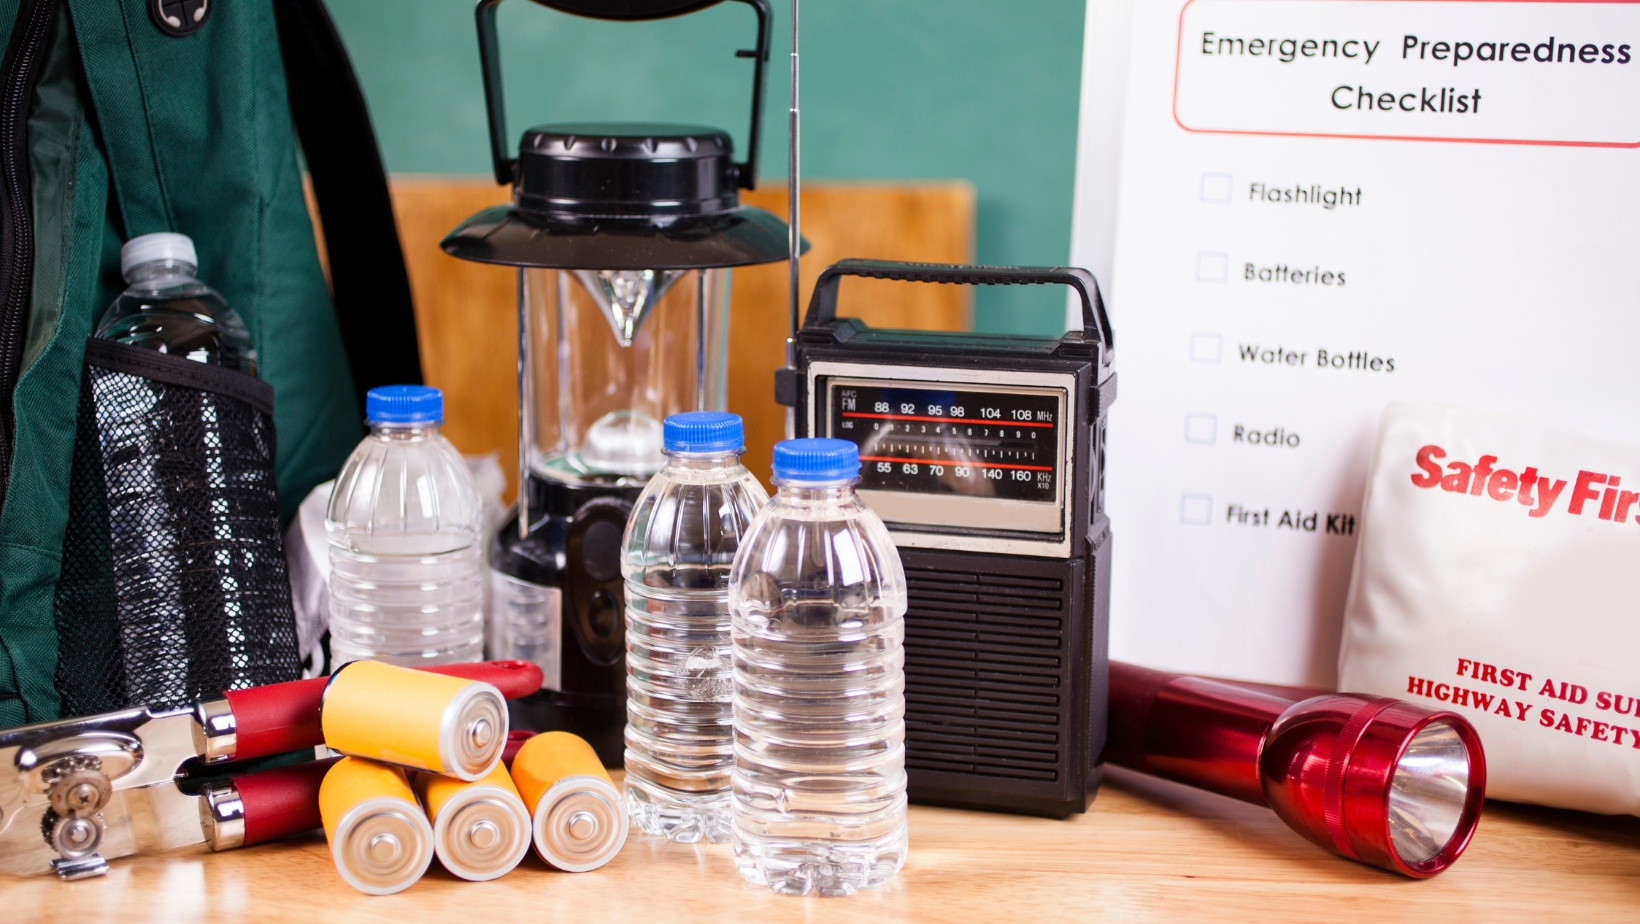 Emergency preparedness supplies including water, a radio, batteries, and more.